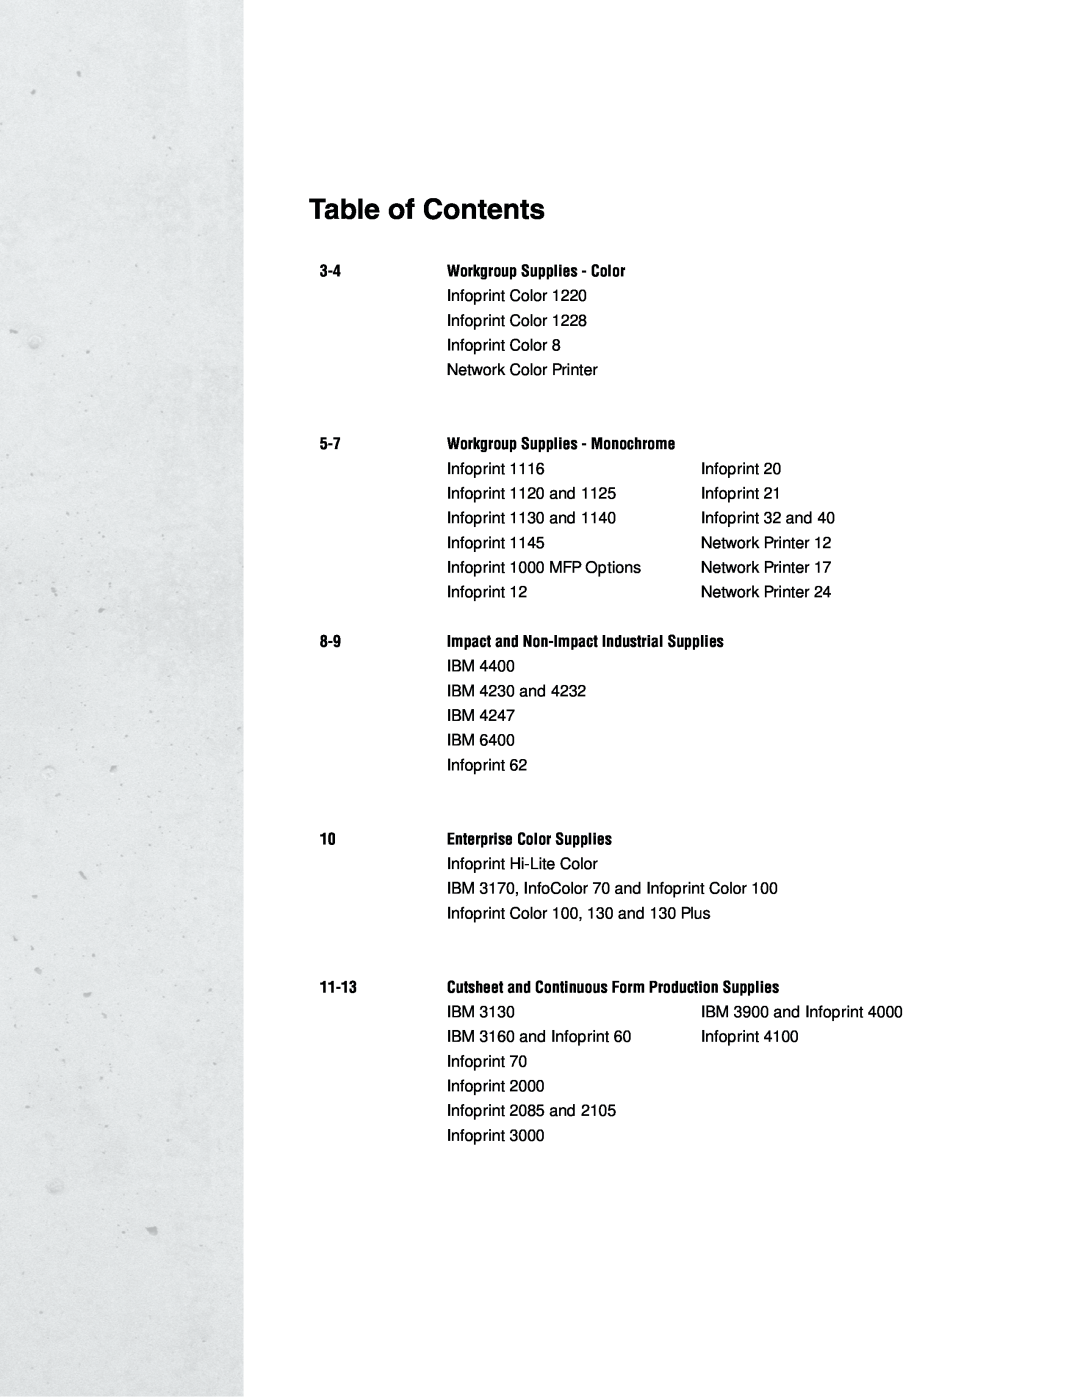 IBM 6400 manual Enterprise Color Supplies, Cutsheet and Continuous Form Production Supplies, Table of Contents 